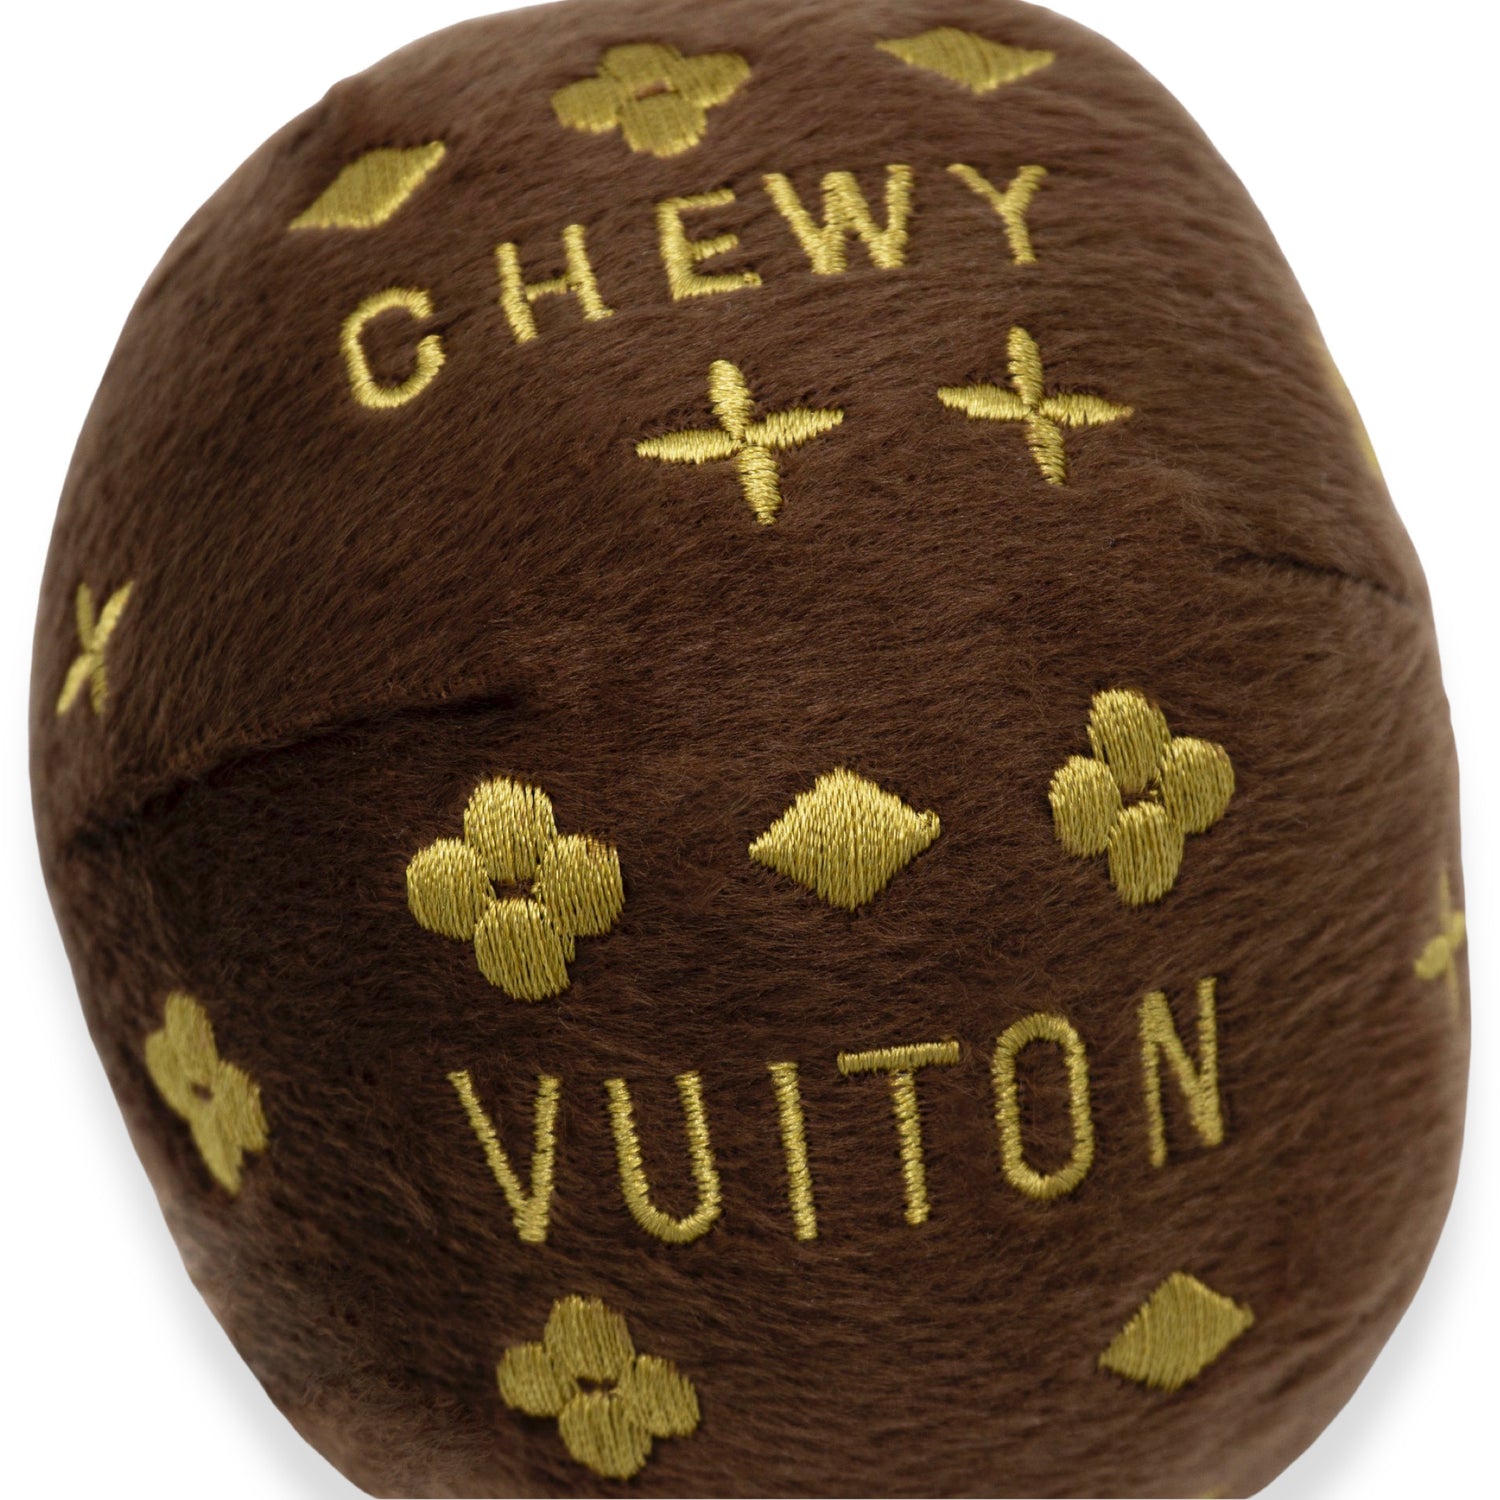 Chewy Vuiton Ball - Brown